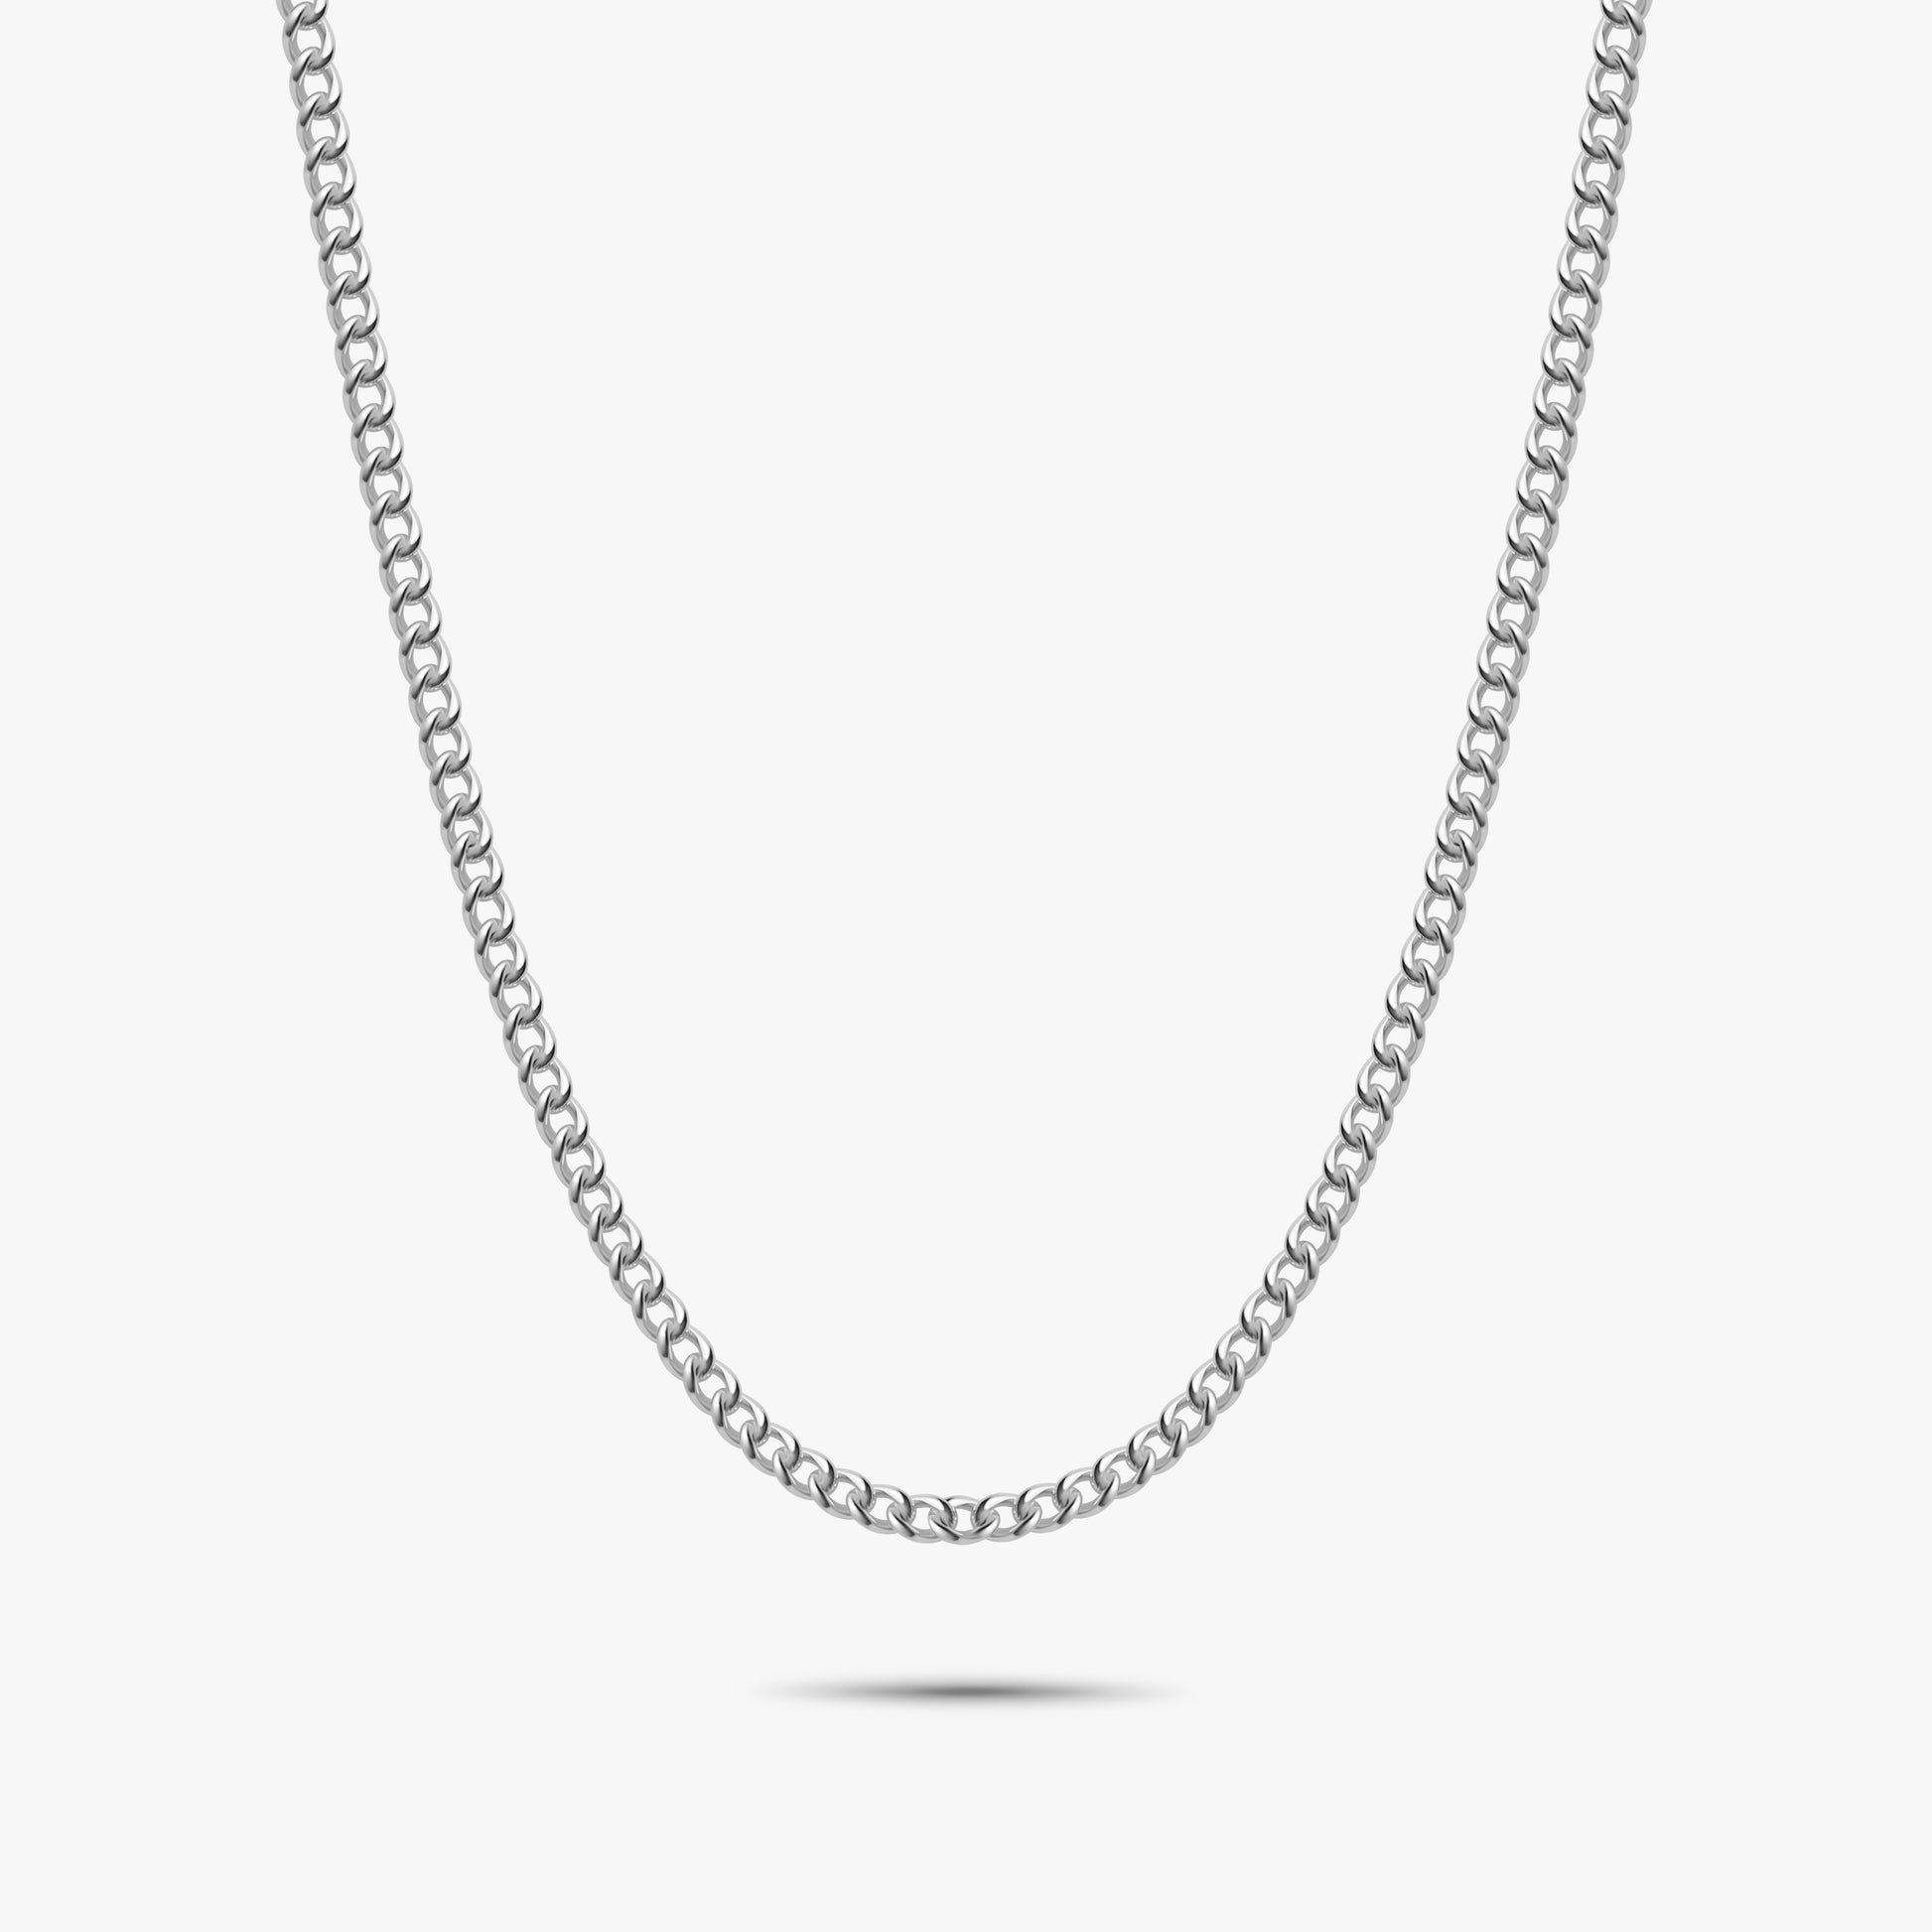 2.4mm sterling silver round curb chain